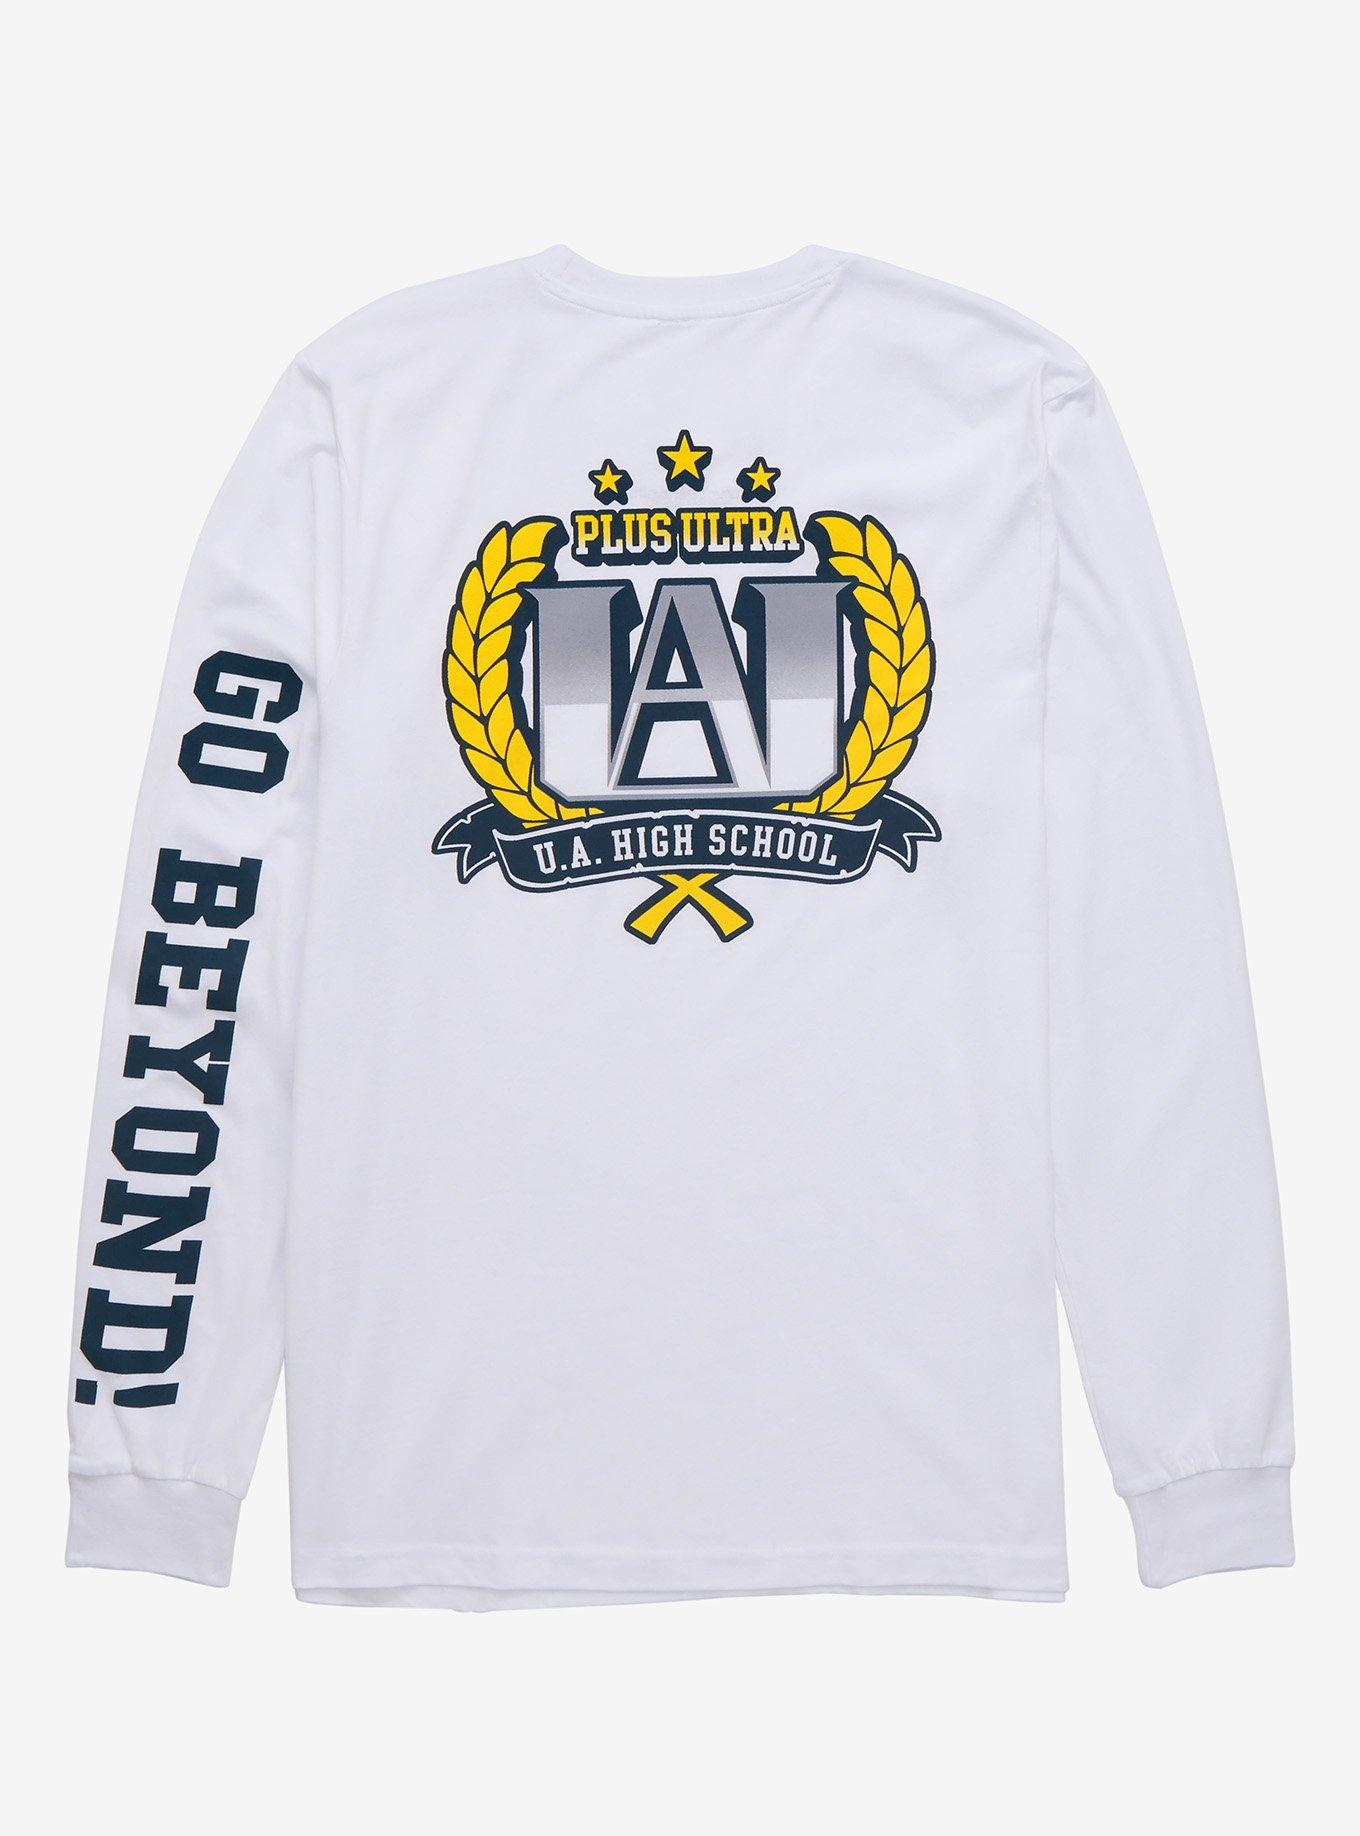 My Hero Academia U.A. High School Crest Long Sleeve T-Shirt - BoxLunch Exclusive, OFF WHITE, alternate